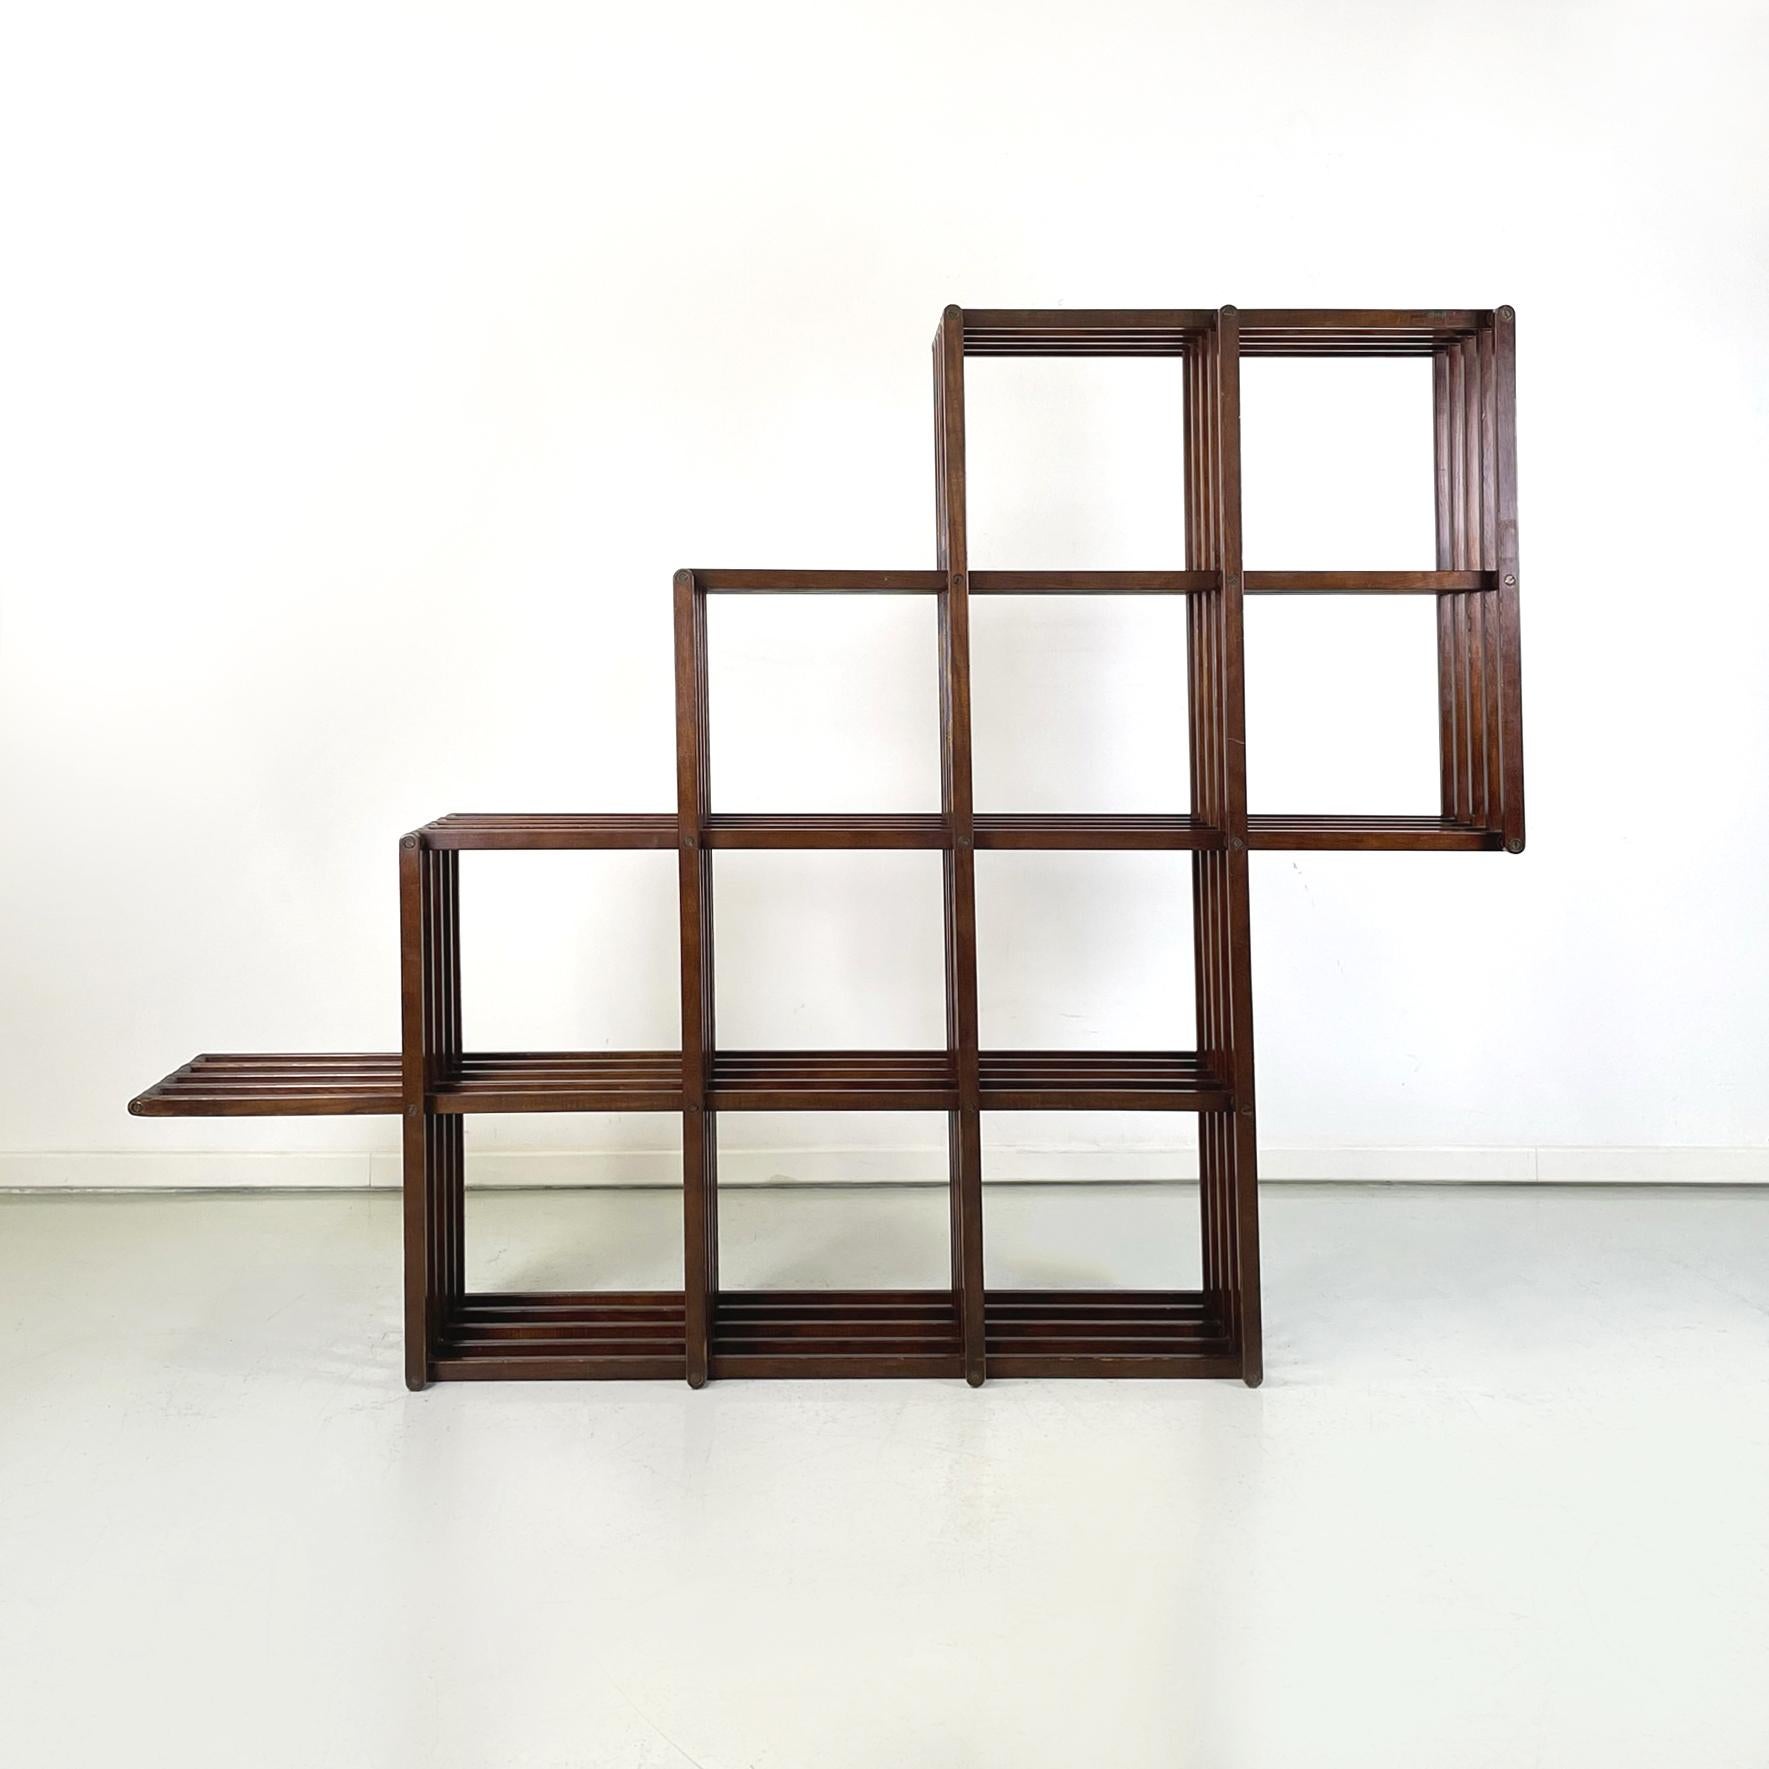 Italian modern Irregular wooden folding floor and wall bookcase by Pool Shop, 1980s
Irregularly shaped  wooden folding bookcase with 11 square compartments and an external shelf. The structure is totally resealable, thanks to the strips that compose